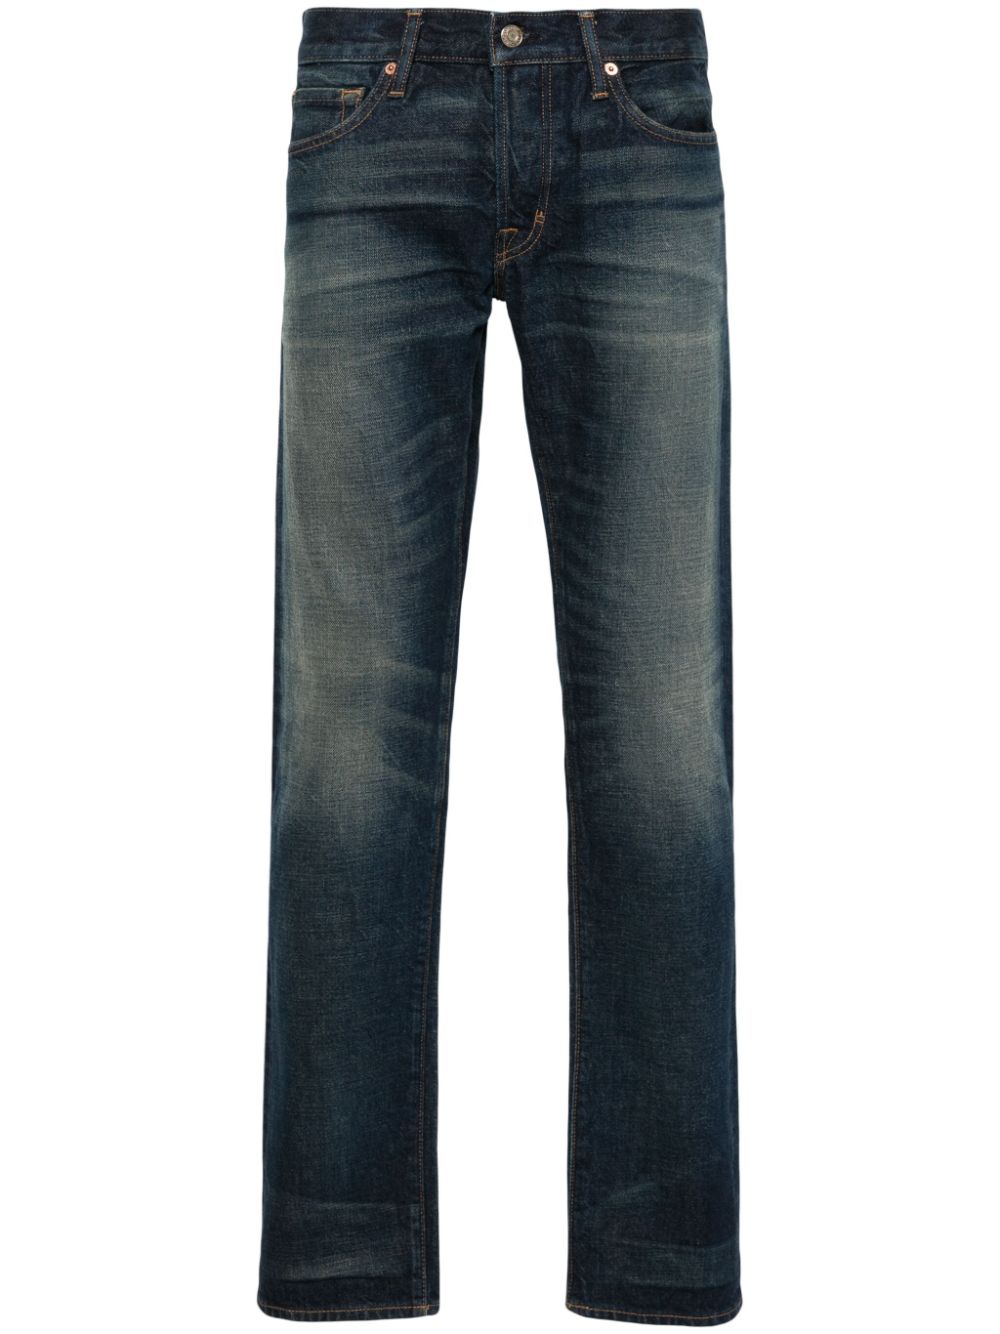 TOM FORD mid-rise slim-fit jeans - Blue von TOM FORD